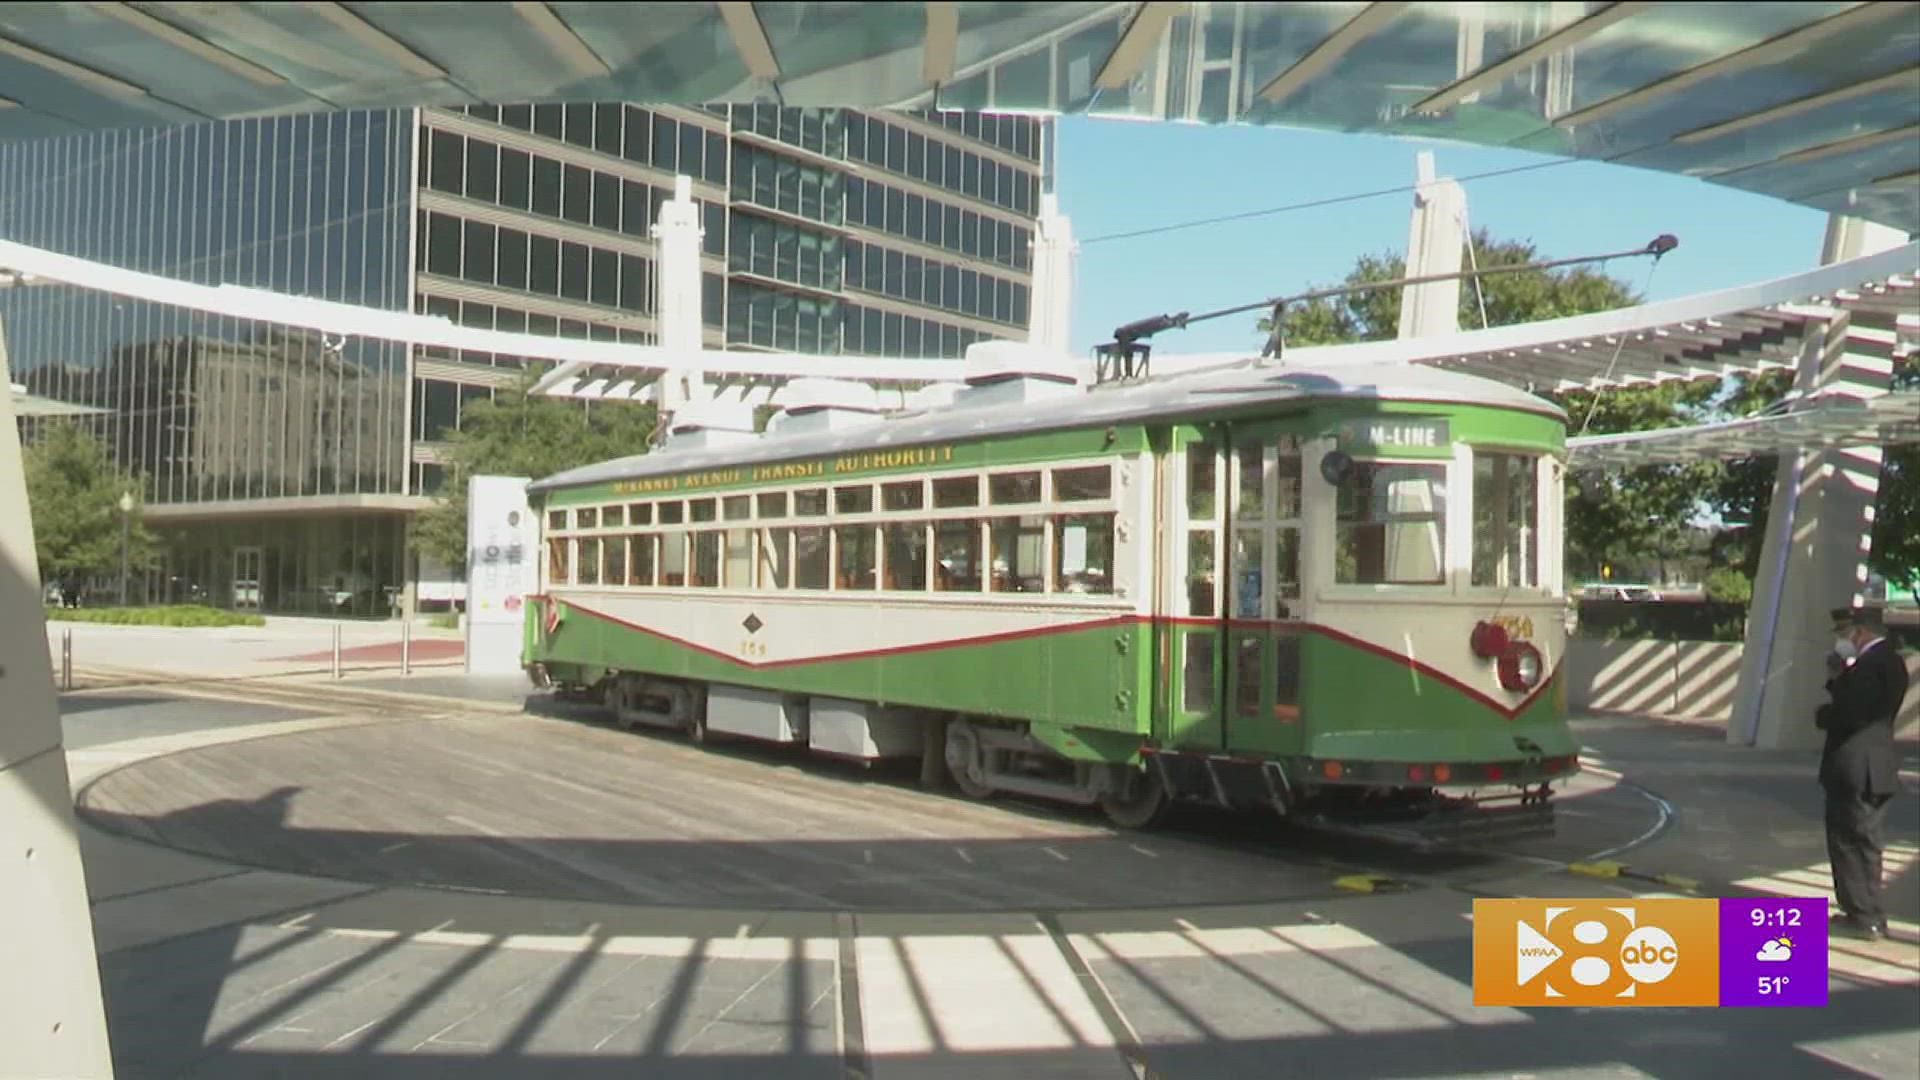 Paige takes a ride on the M-line... which takes riders through uptown and downtown Dallas on historic trolley cars... all for free!